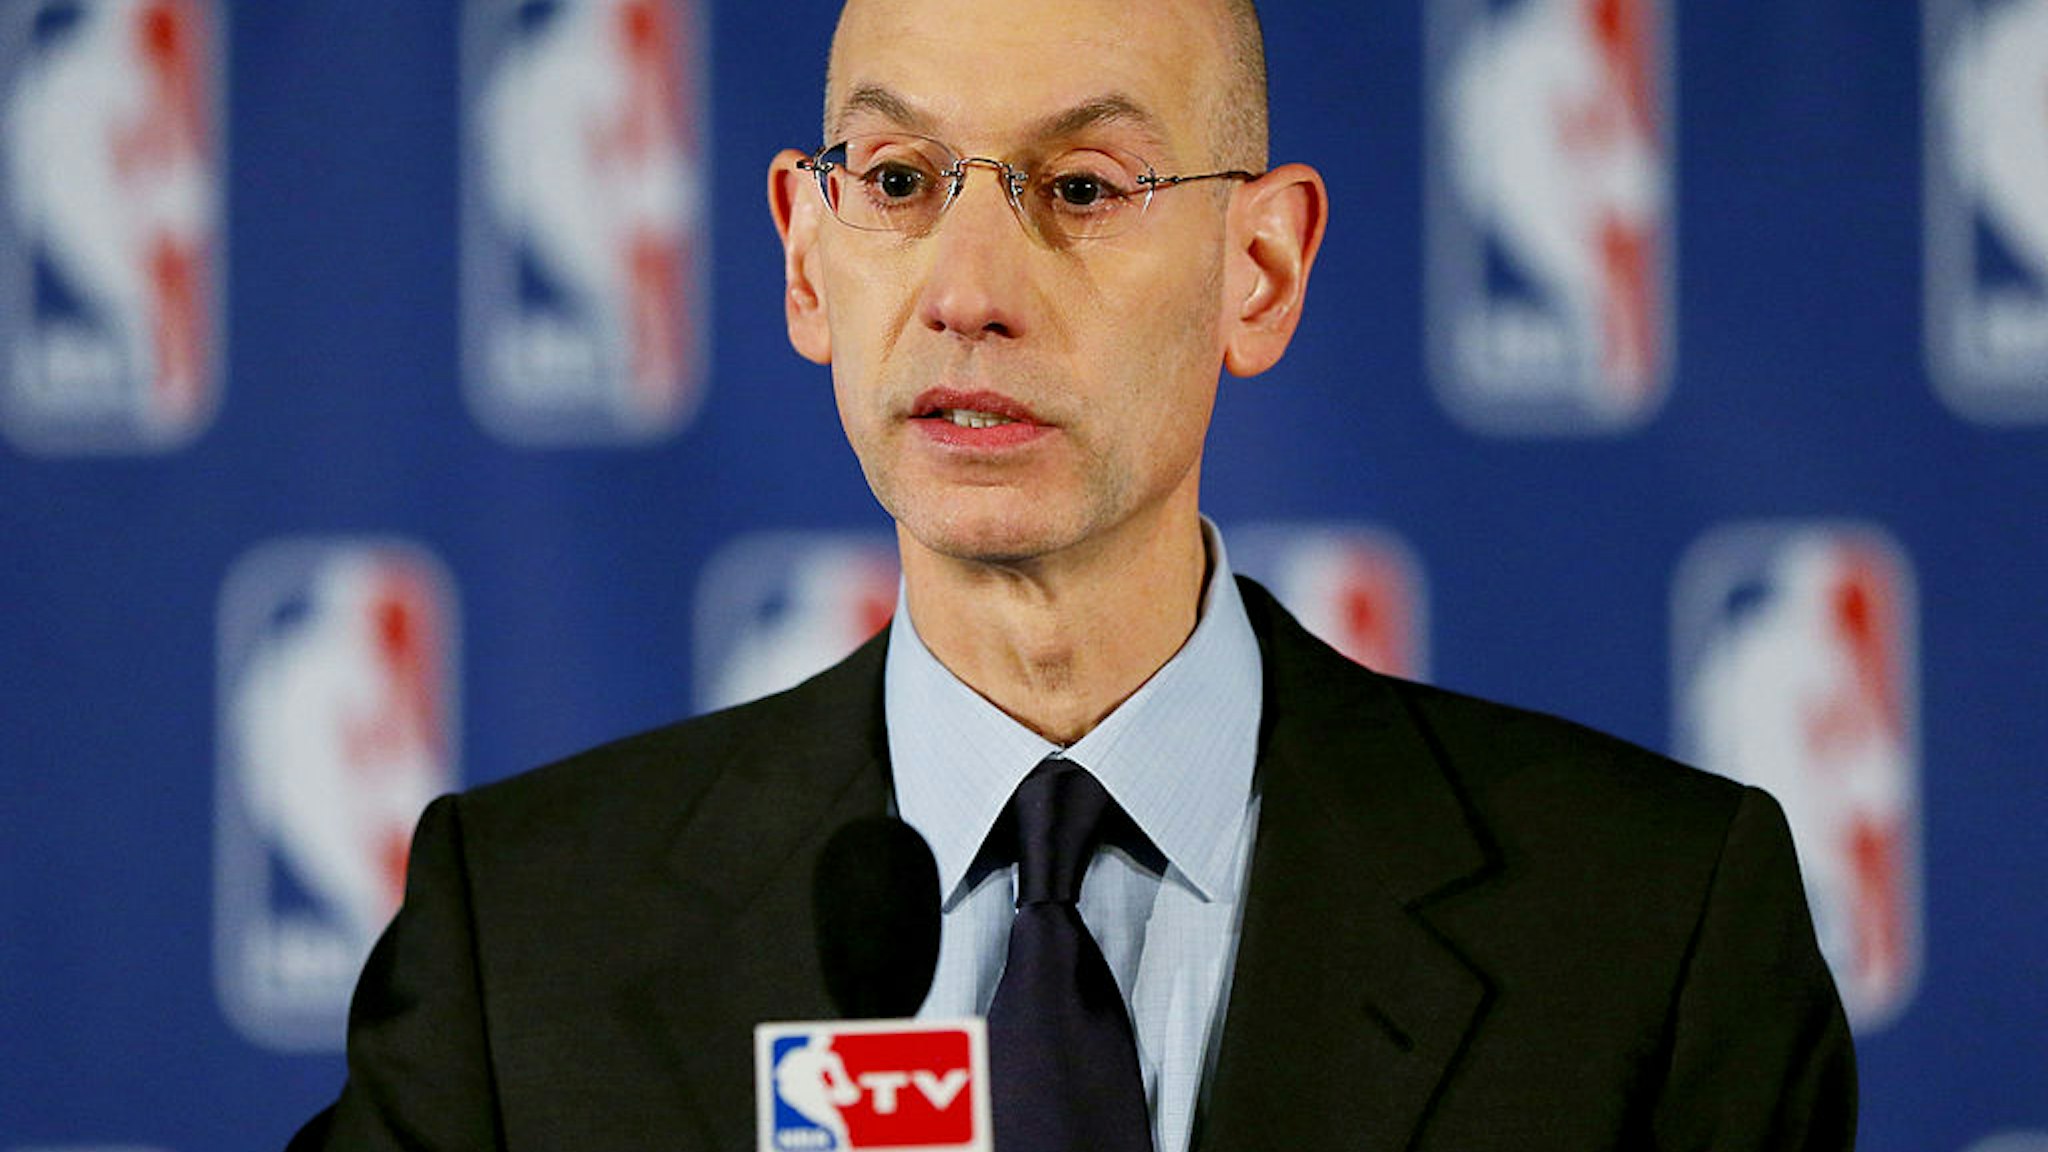 NEW YORK, NY - APRIL 29: NBA Commissioner Adam Silver holds a press conference to discuss Los Angeles Clippers owner Donald Sterling at the Hilton Hotel on April 29, 2014 in New York City. Silver announced that Sterling will be banned from the NBA for life and will be fined $2.5 million for racist comments released in audio recordings. (Photo by Elsa/Getty Images)